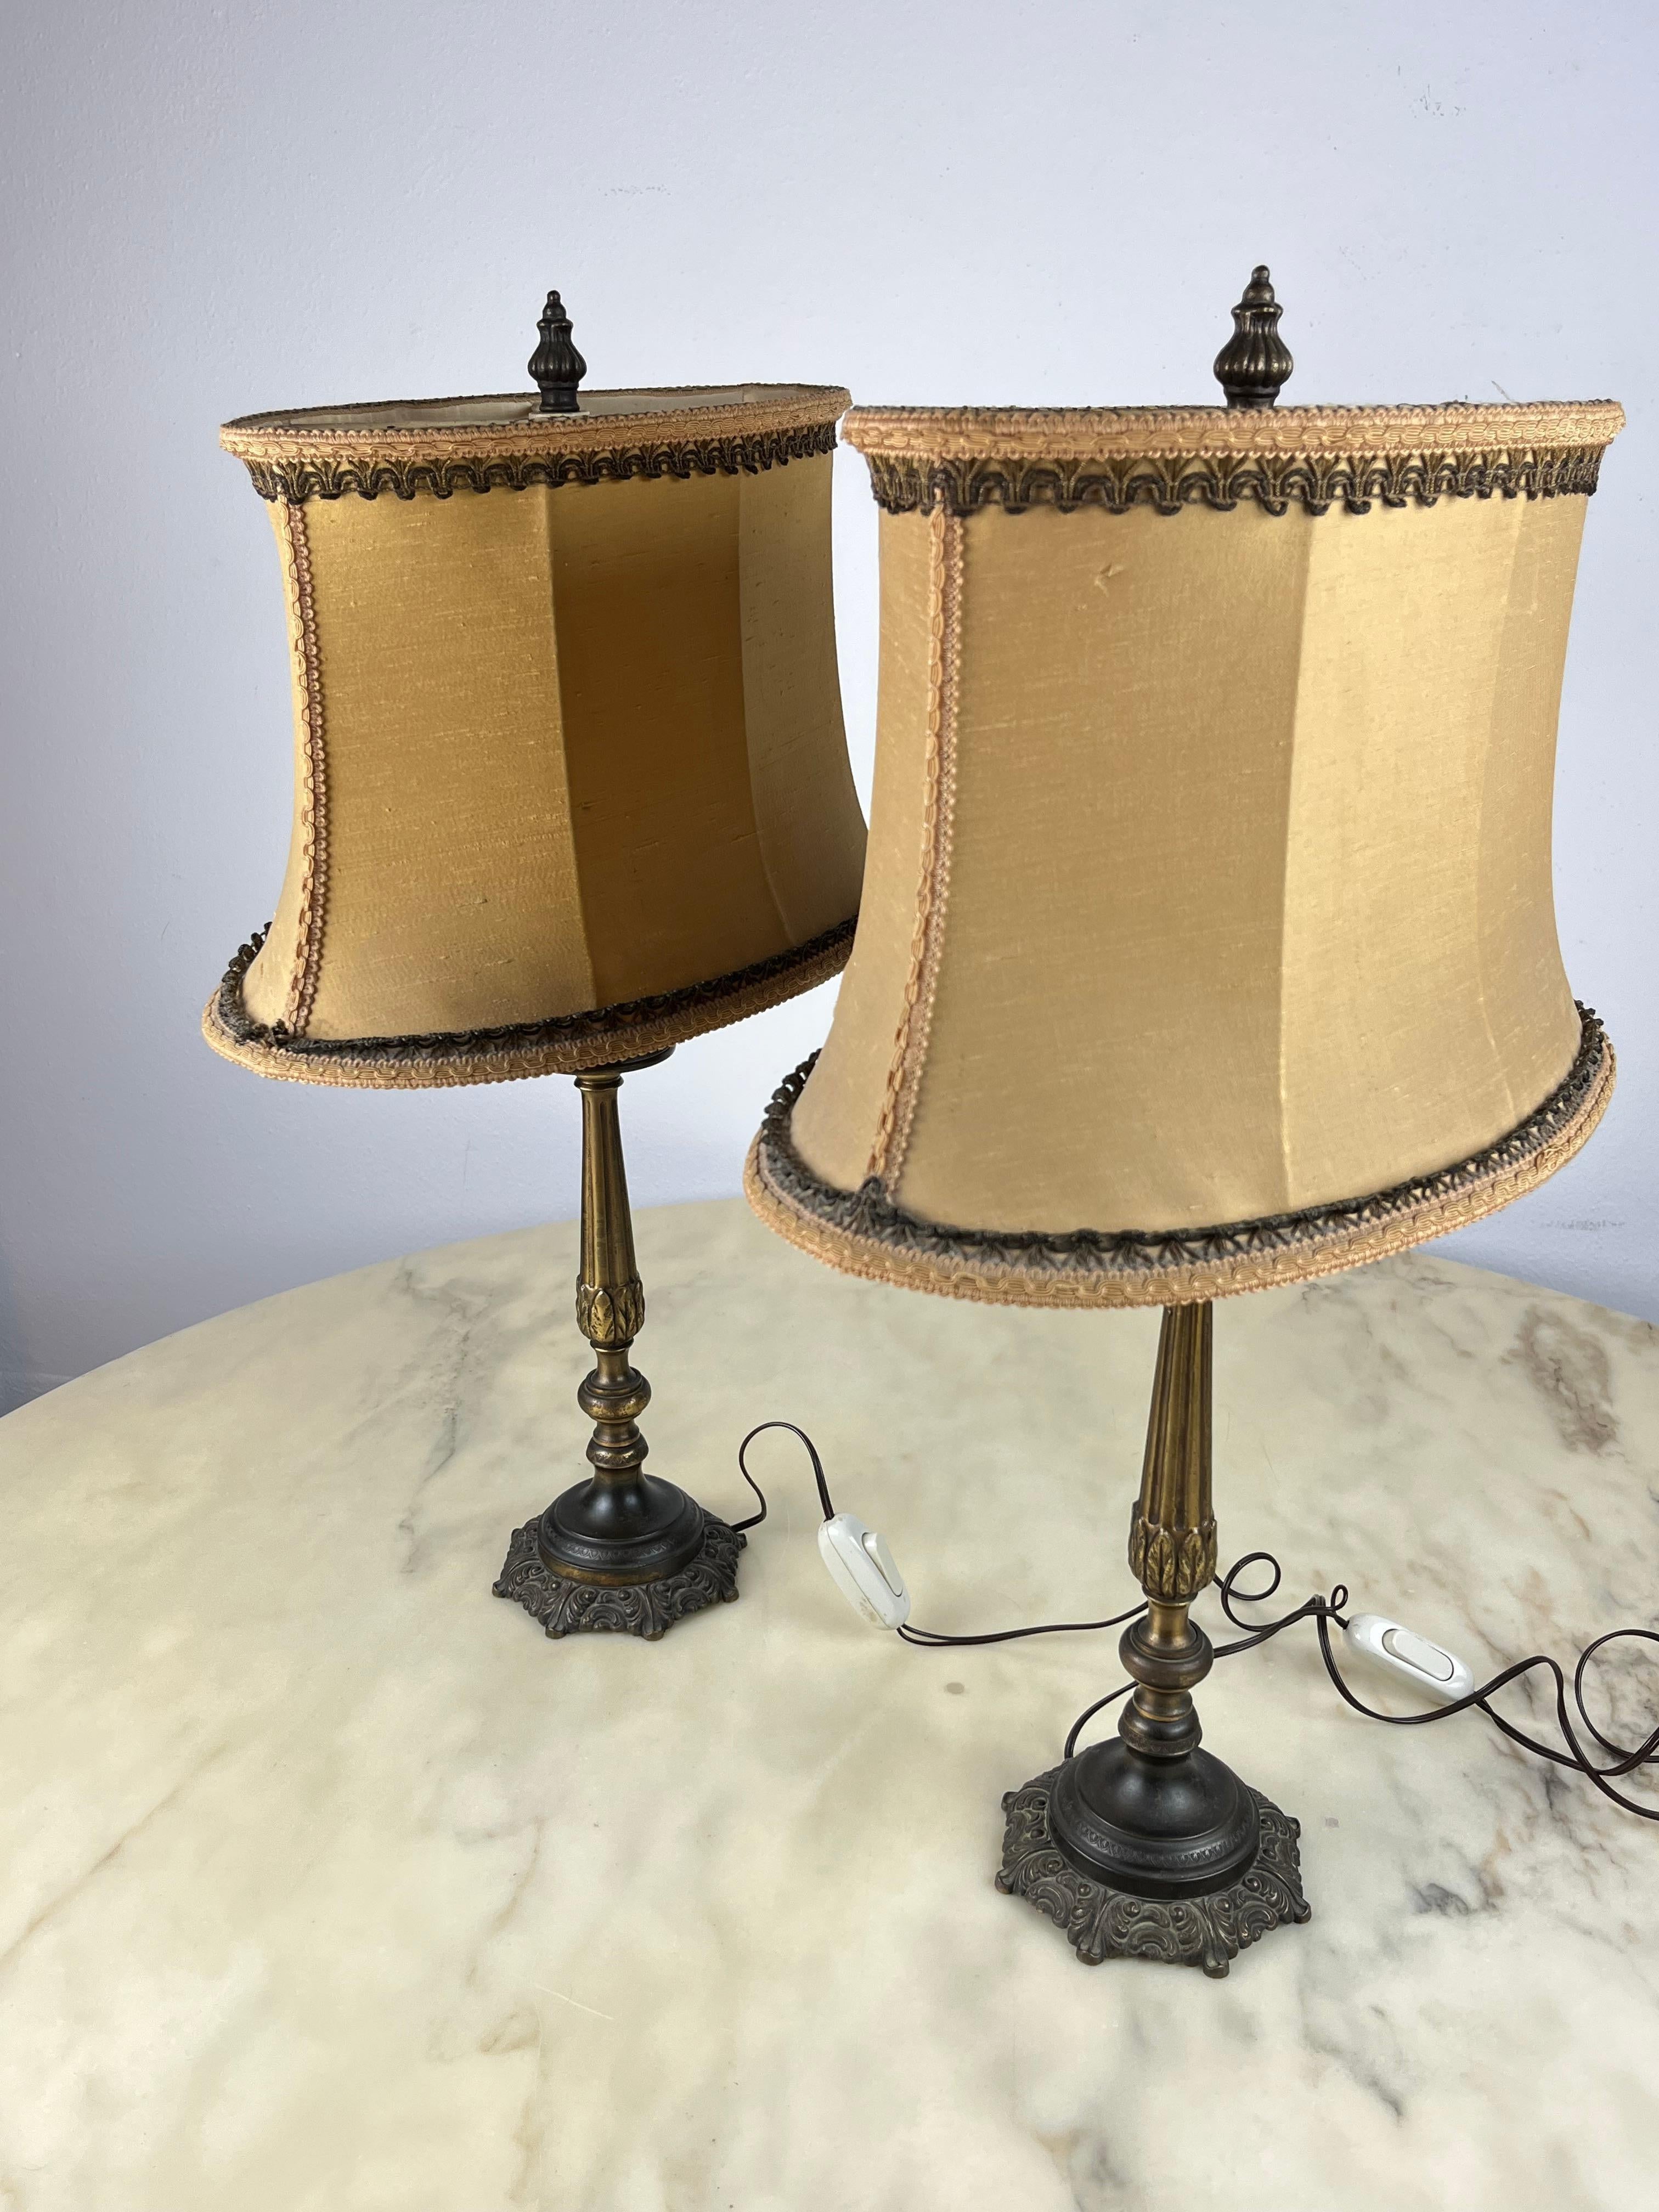 how tall should table lamps be